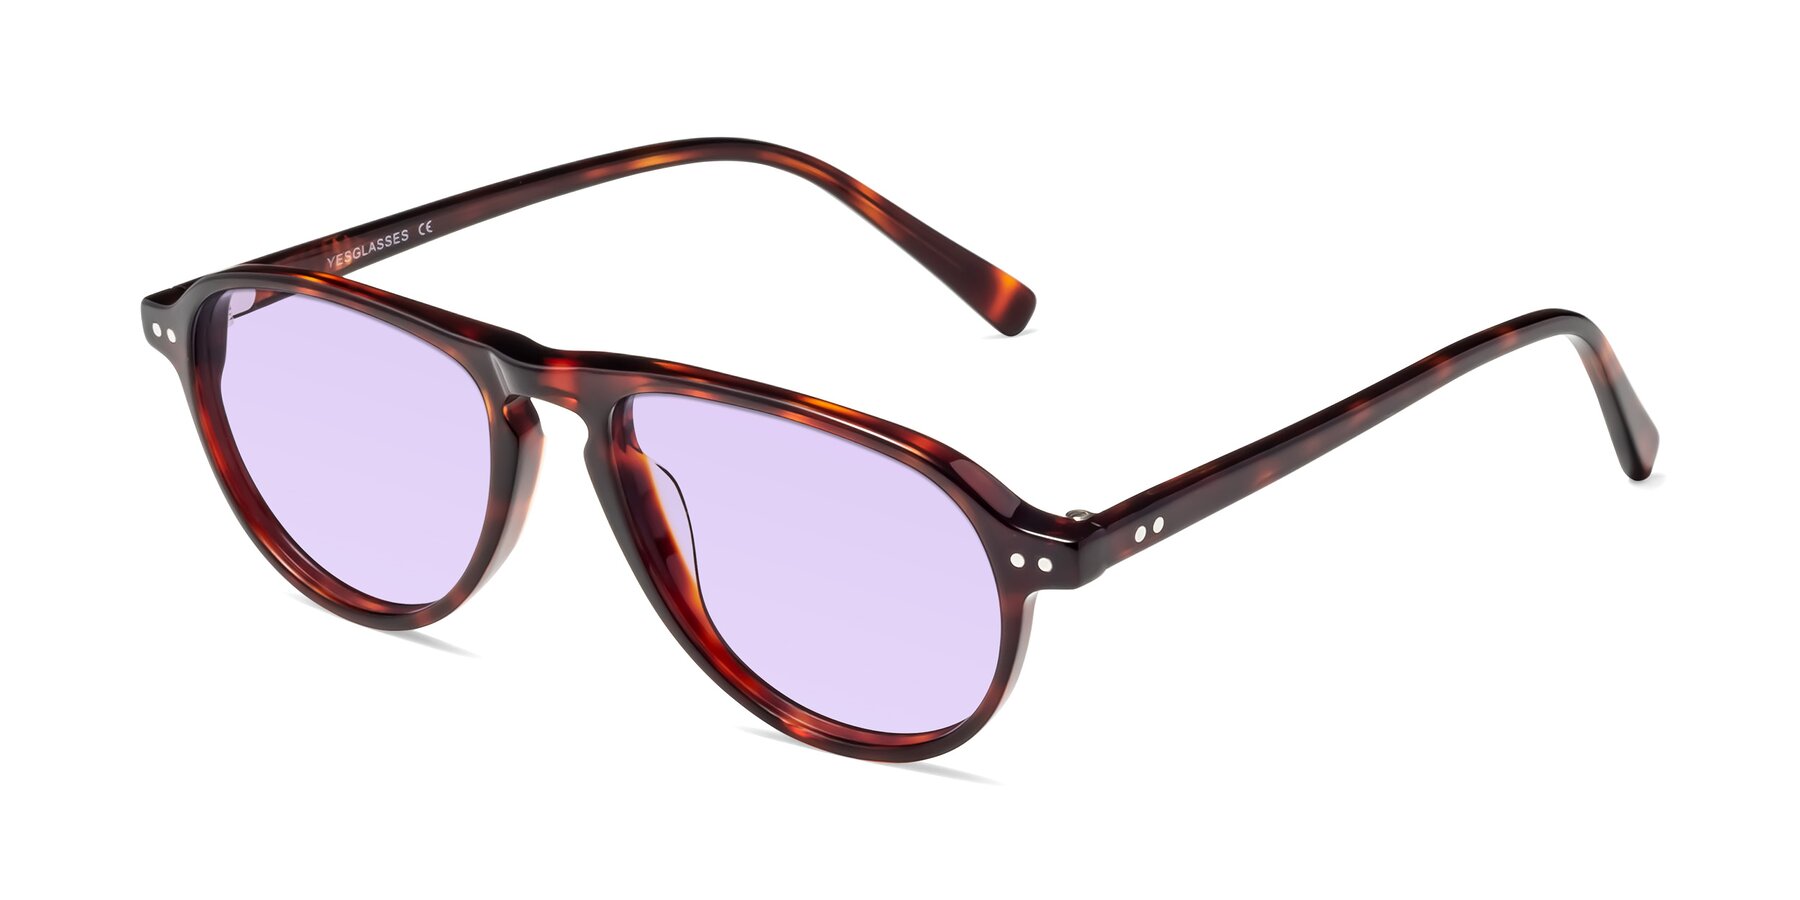 Angle of 17544 in Burgundy Tortoise with Light Purple Tinted Lenses